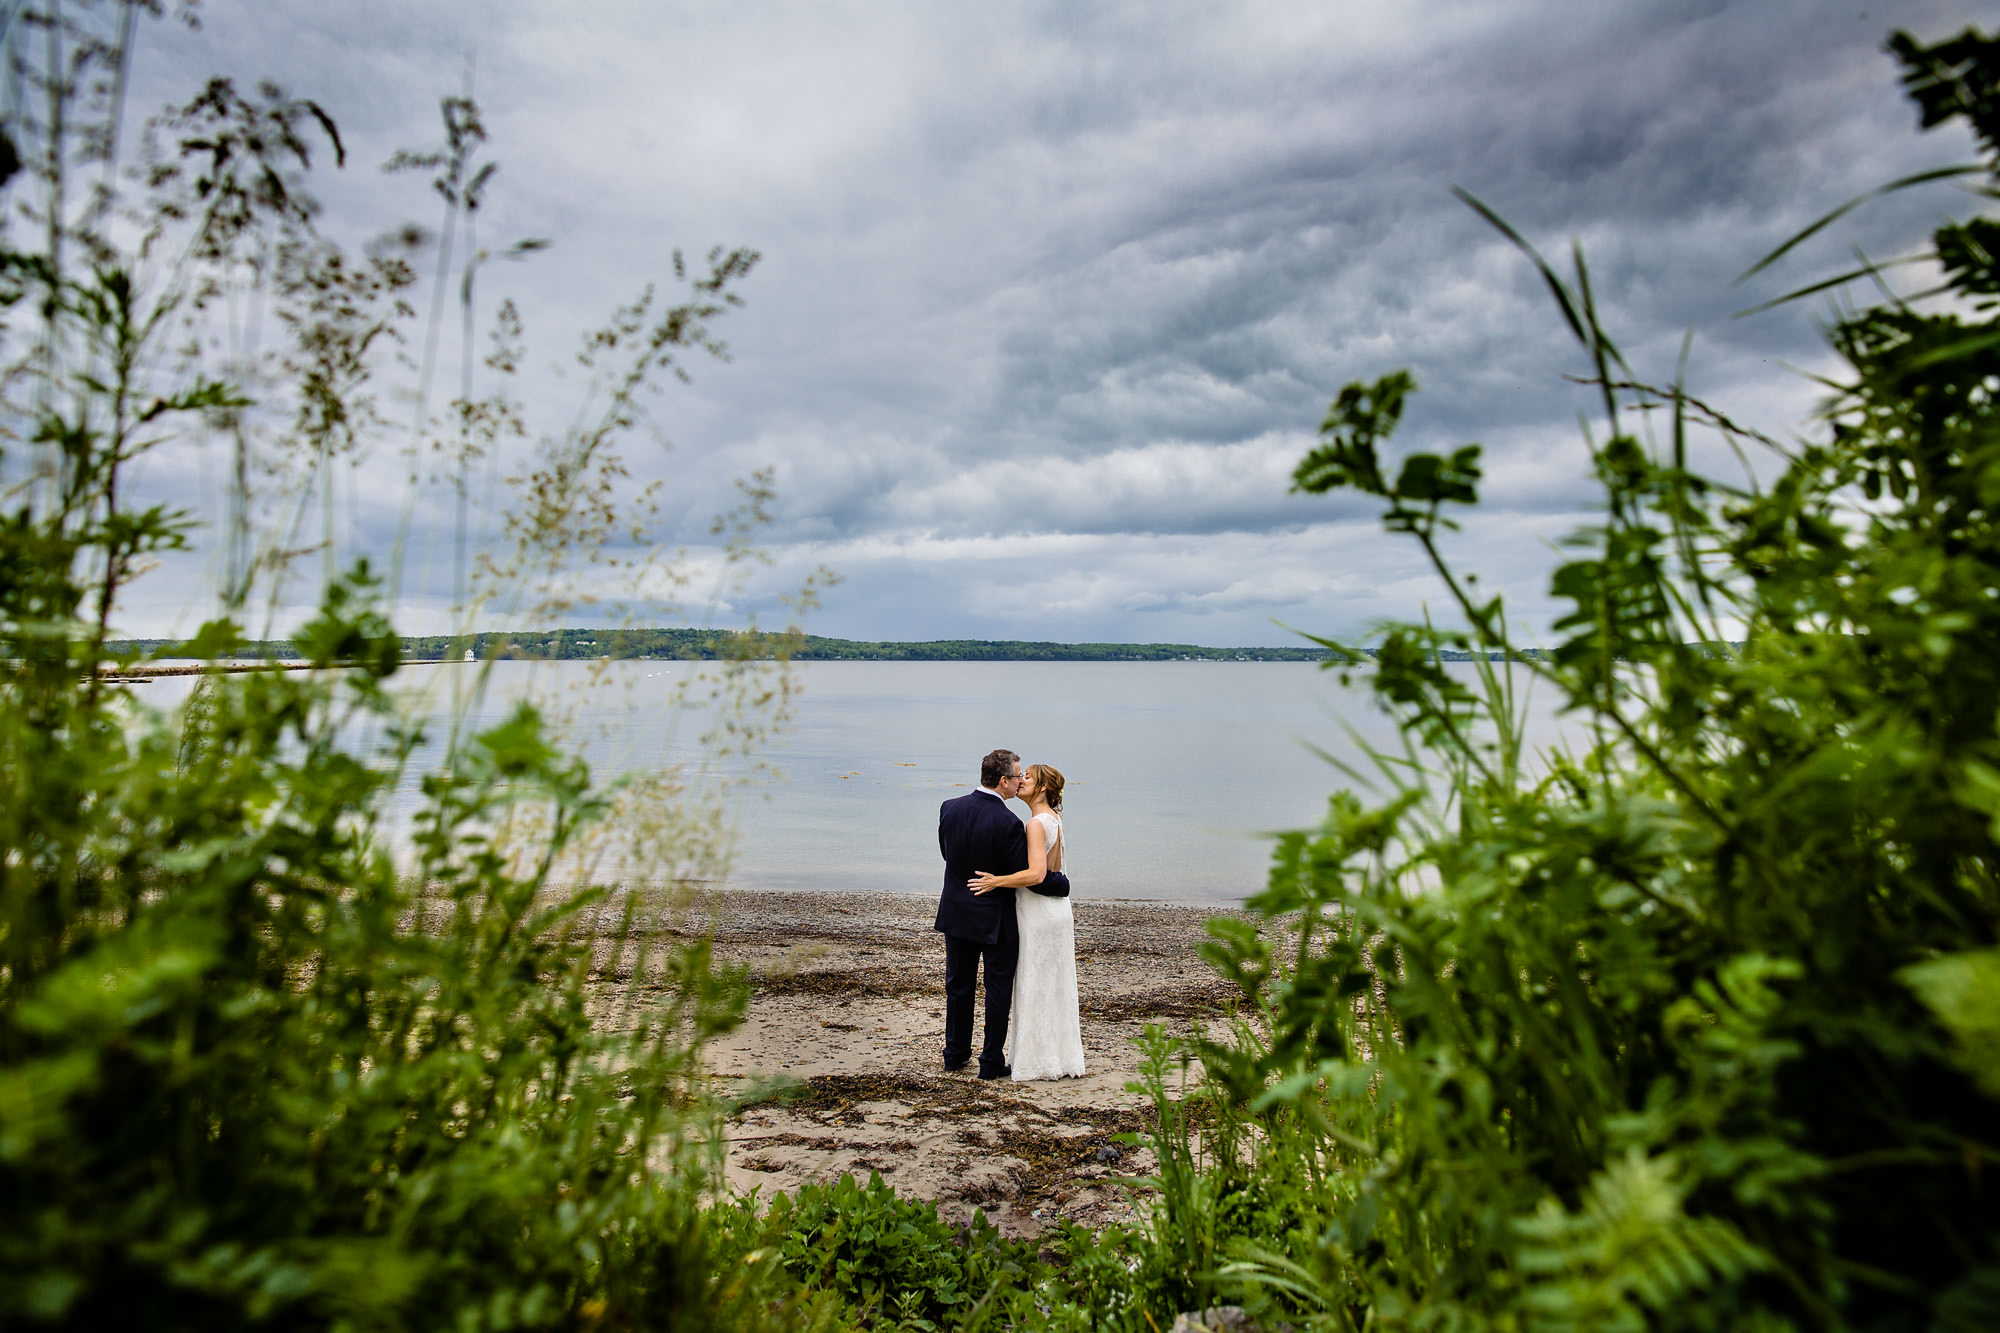 A bride and groom take wedding portraits at the Rockland Breakwater in Maine